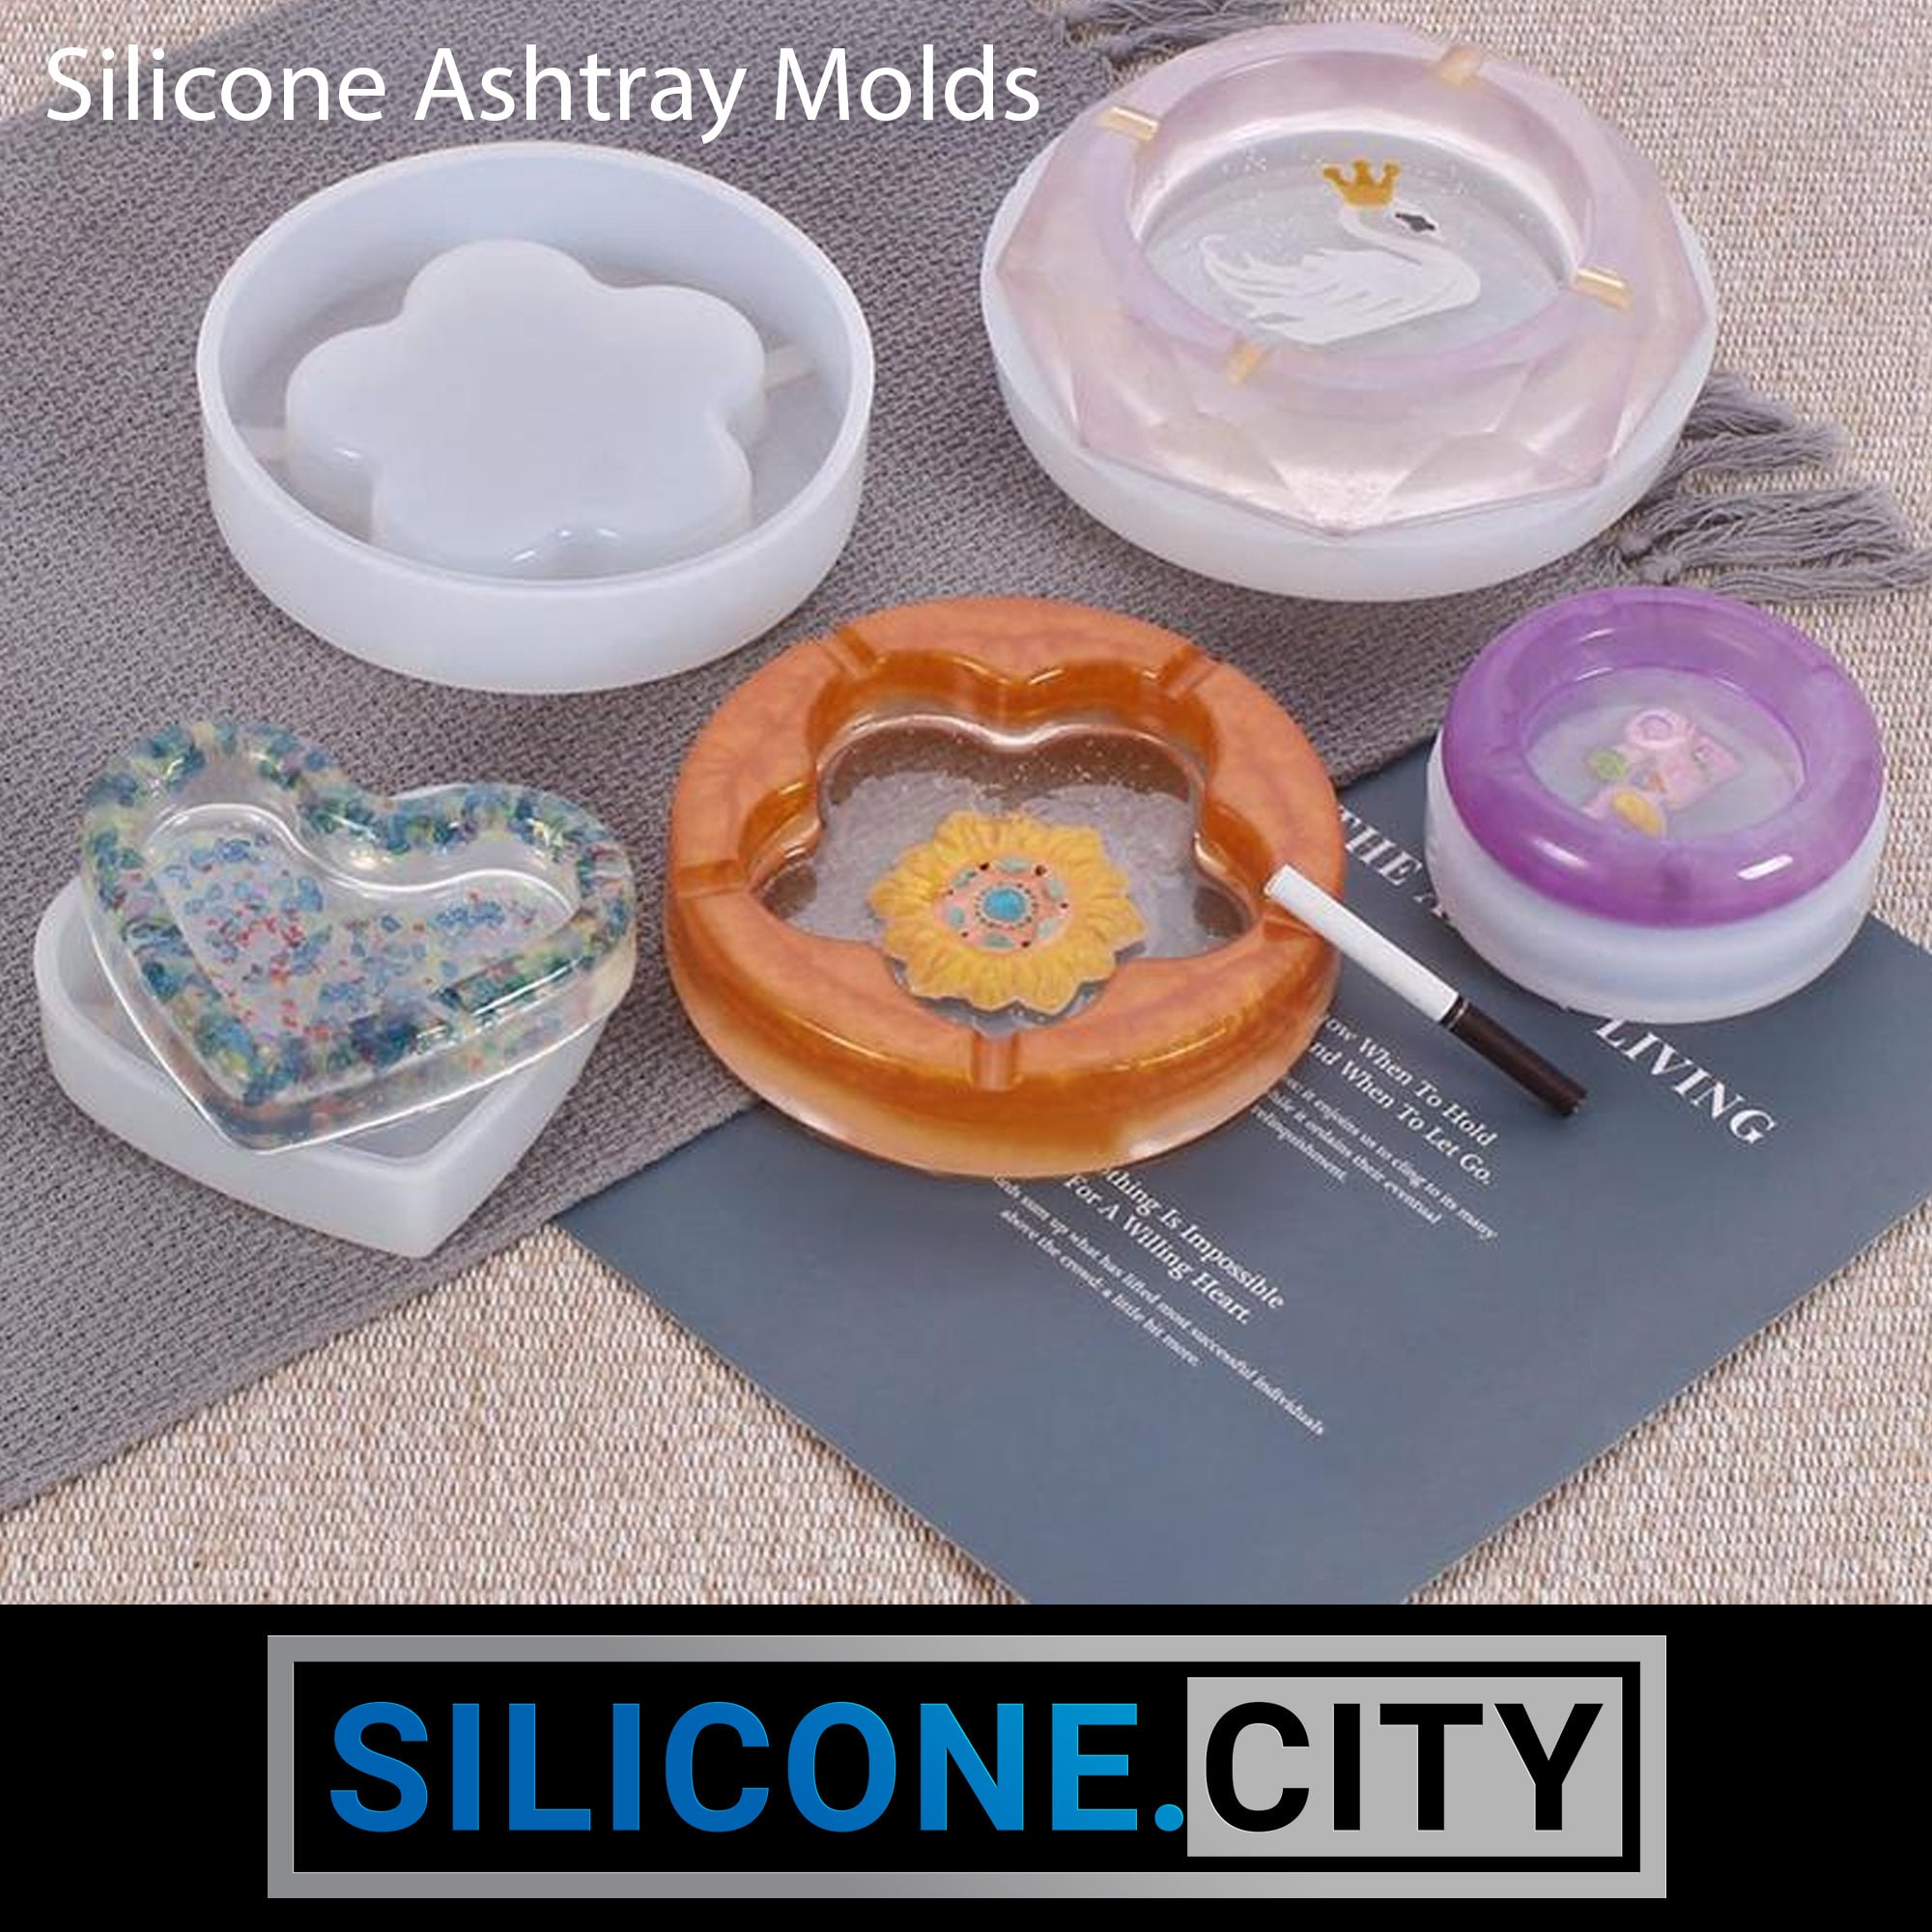 Smoke Set Silicone Mold, Ashtray Resin Molds, Rolling Tray Mold Resin,  Grinder Resin Mold, Maintenance Box Mold, DIY Craft Casting Tray 